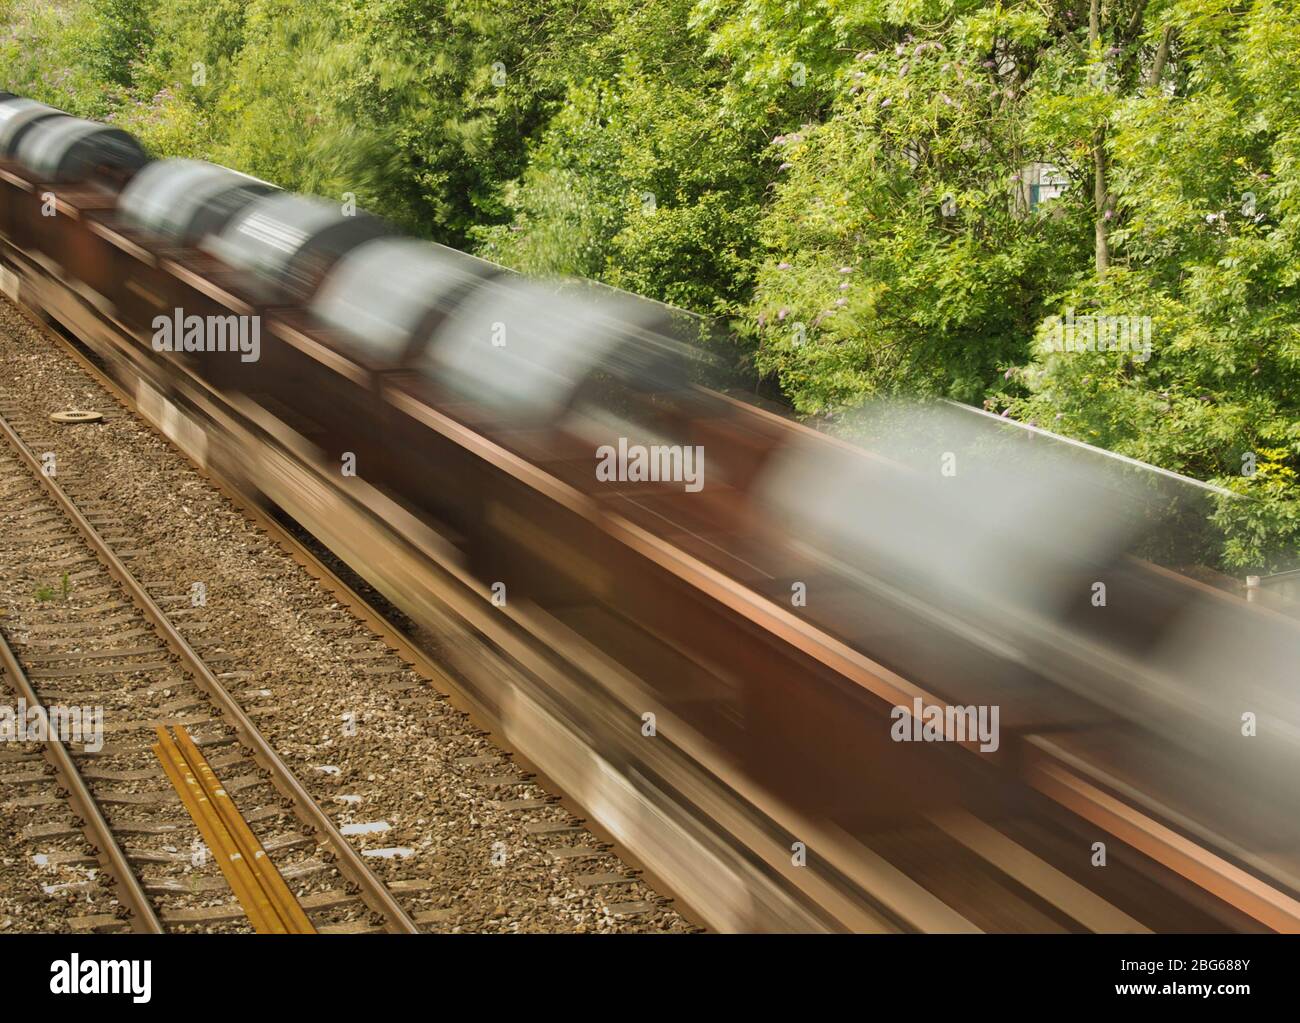 Cardiff, Wales - August 2017: The wagons of a freight train carrying steel coils with slow shutter speed to show motion Stock Photo